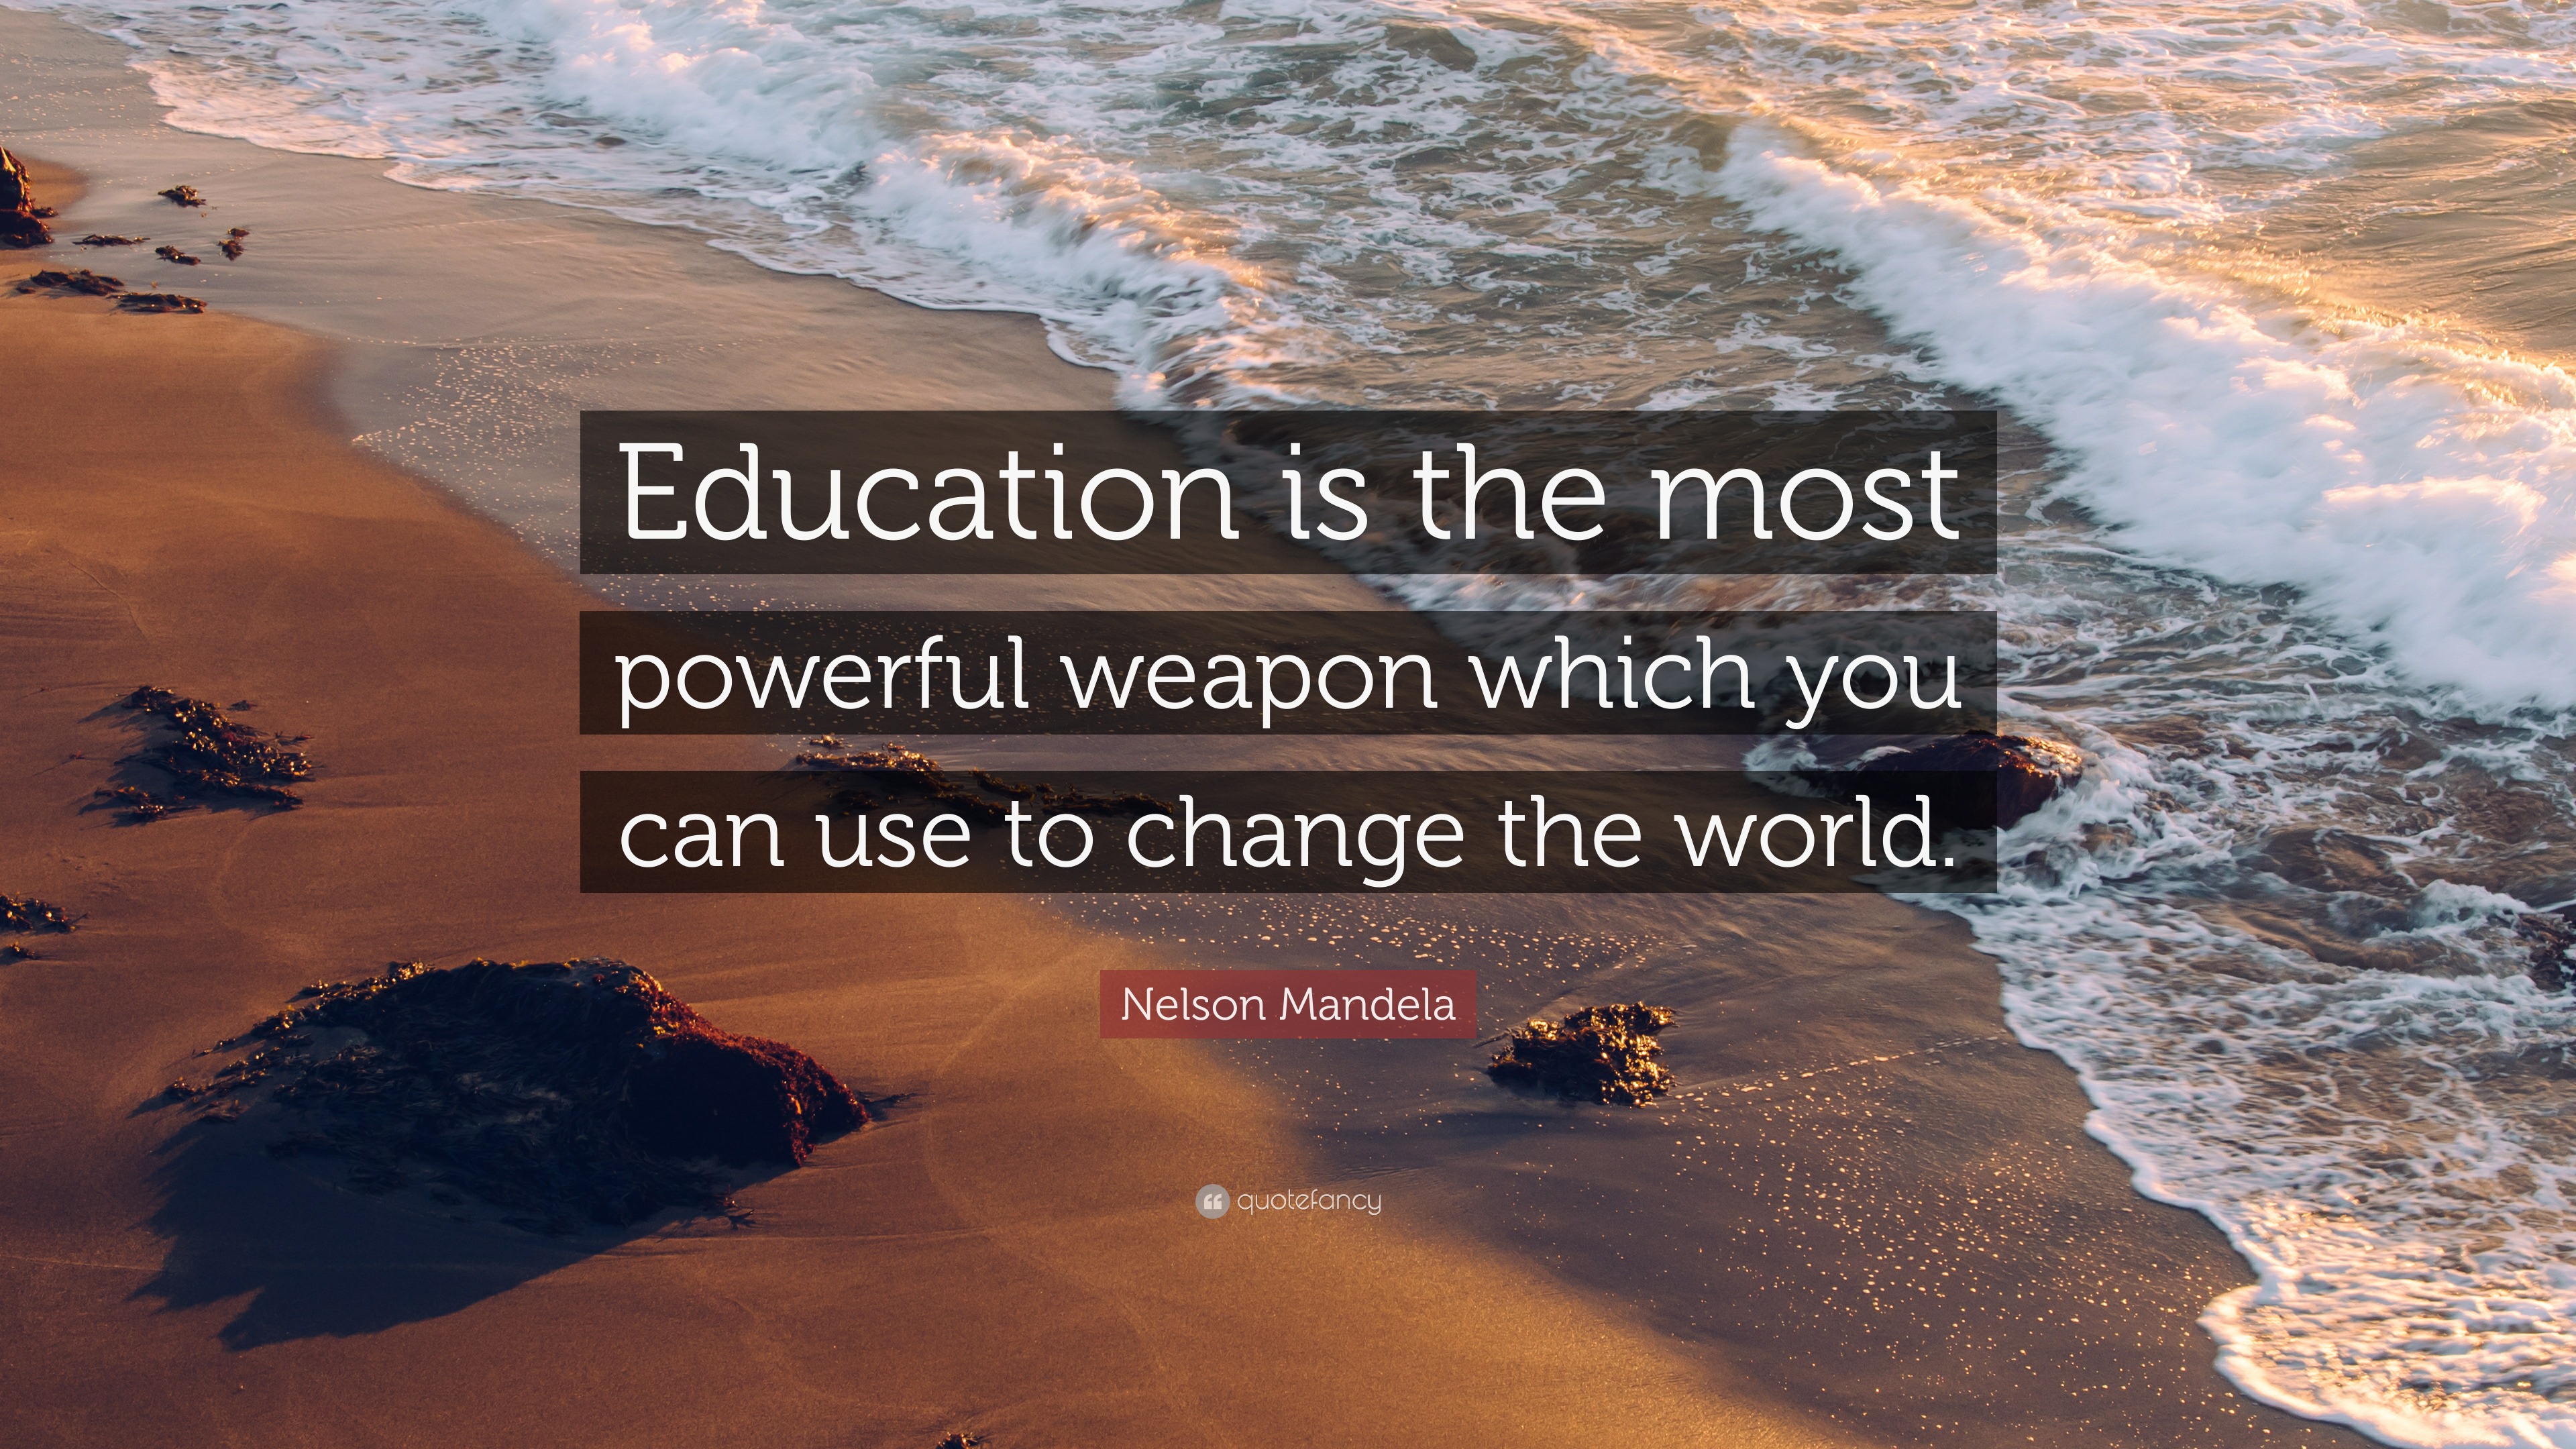 essay on education can change the world